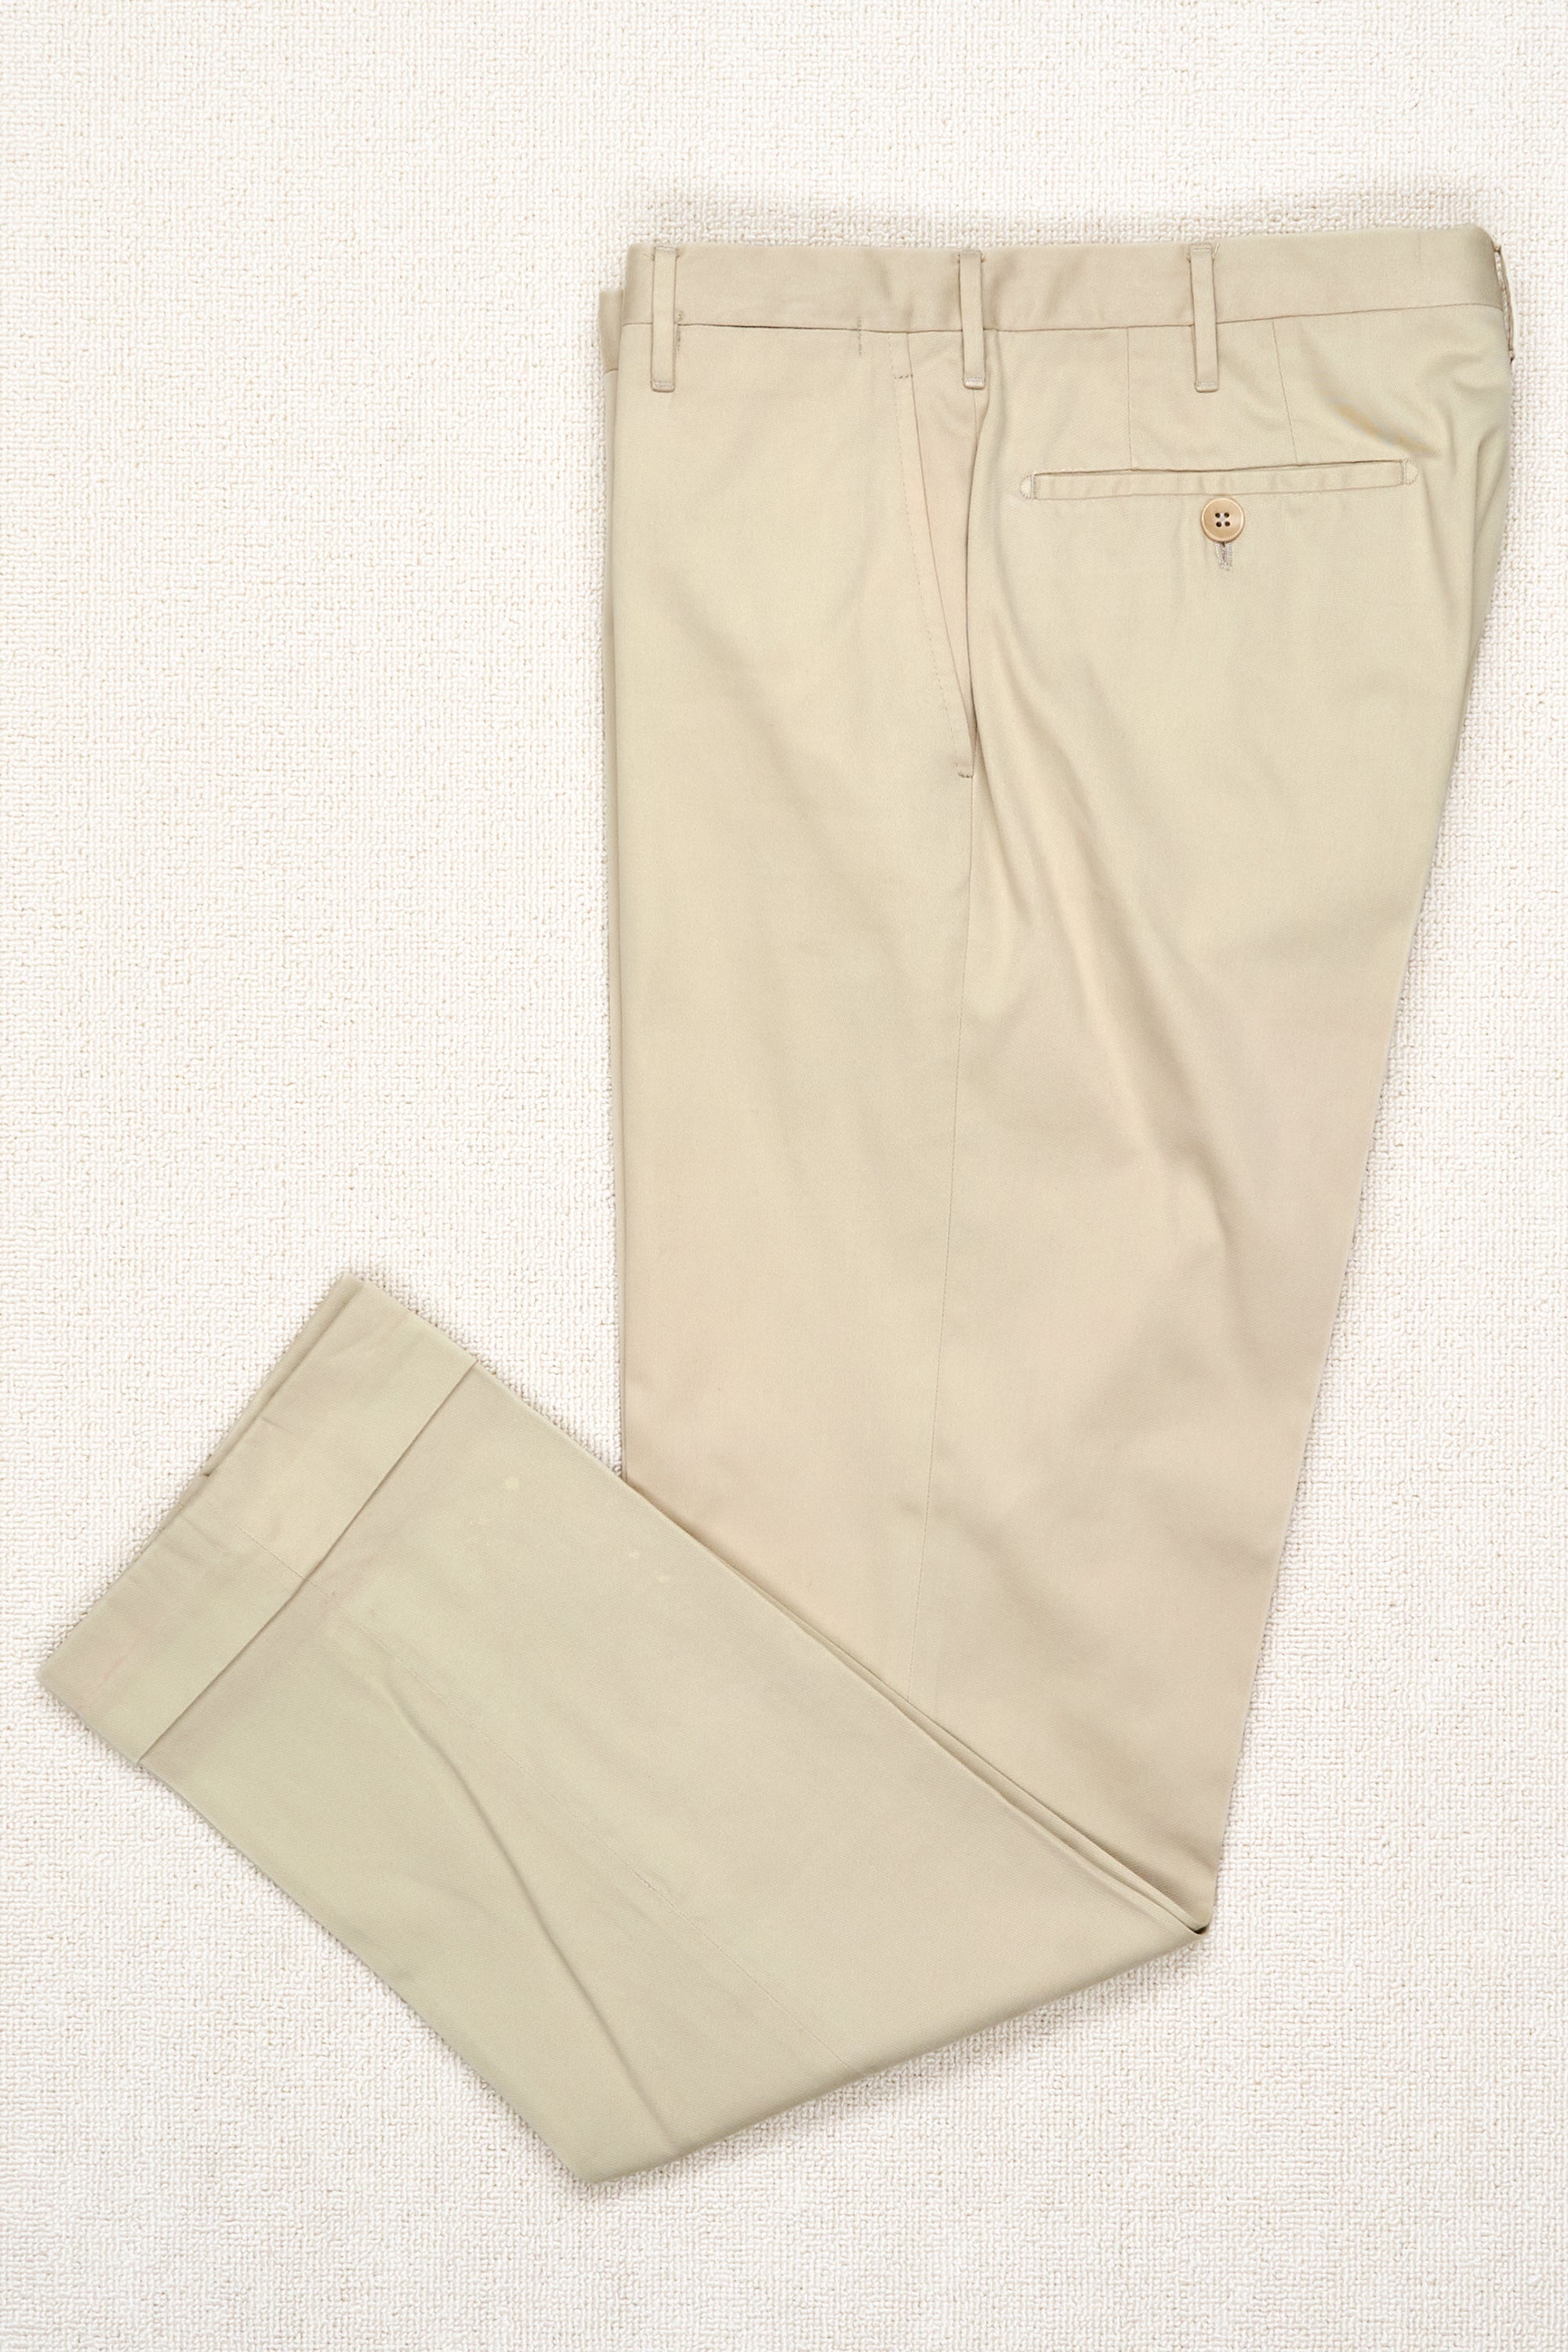 Rota Beige Cotton Flat Front Trousers